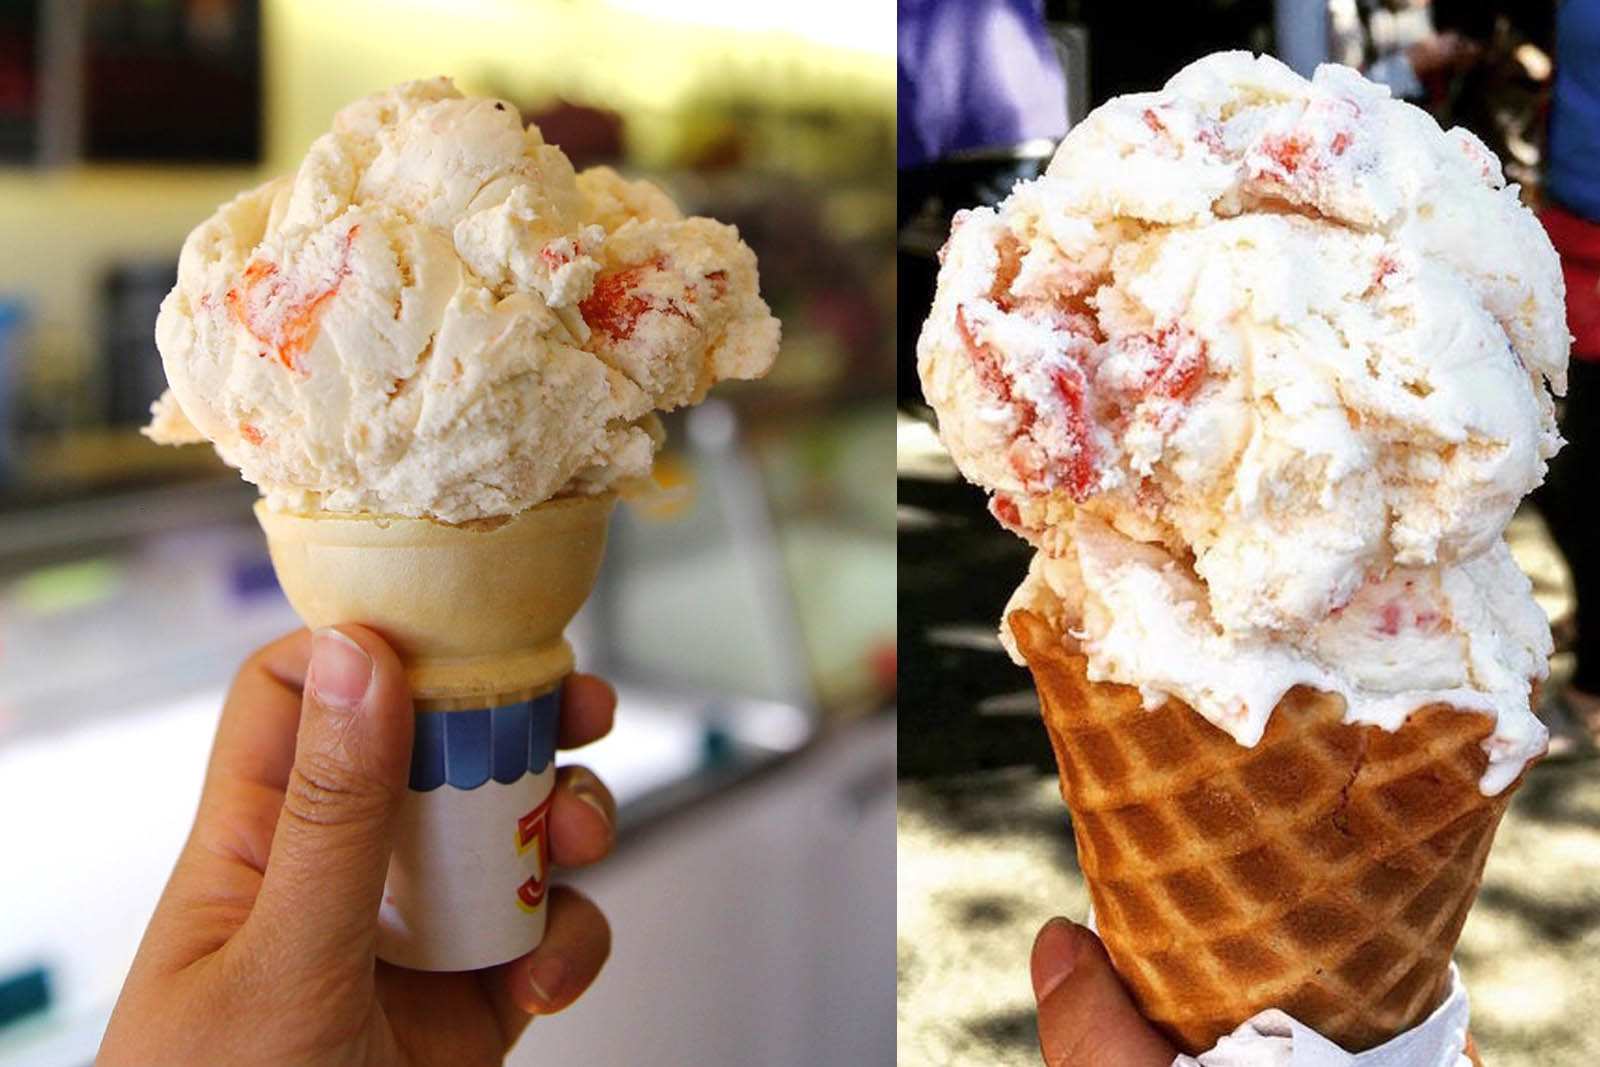 🍦 It’s Time to Vote “Yay” Or “Nay” On These Unusual Ice Cream Flavors Lobster Ice Cream